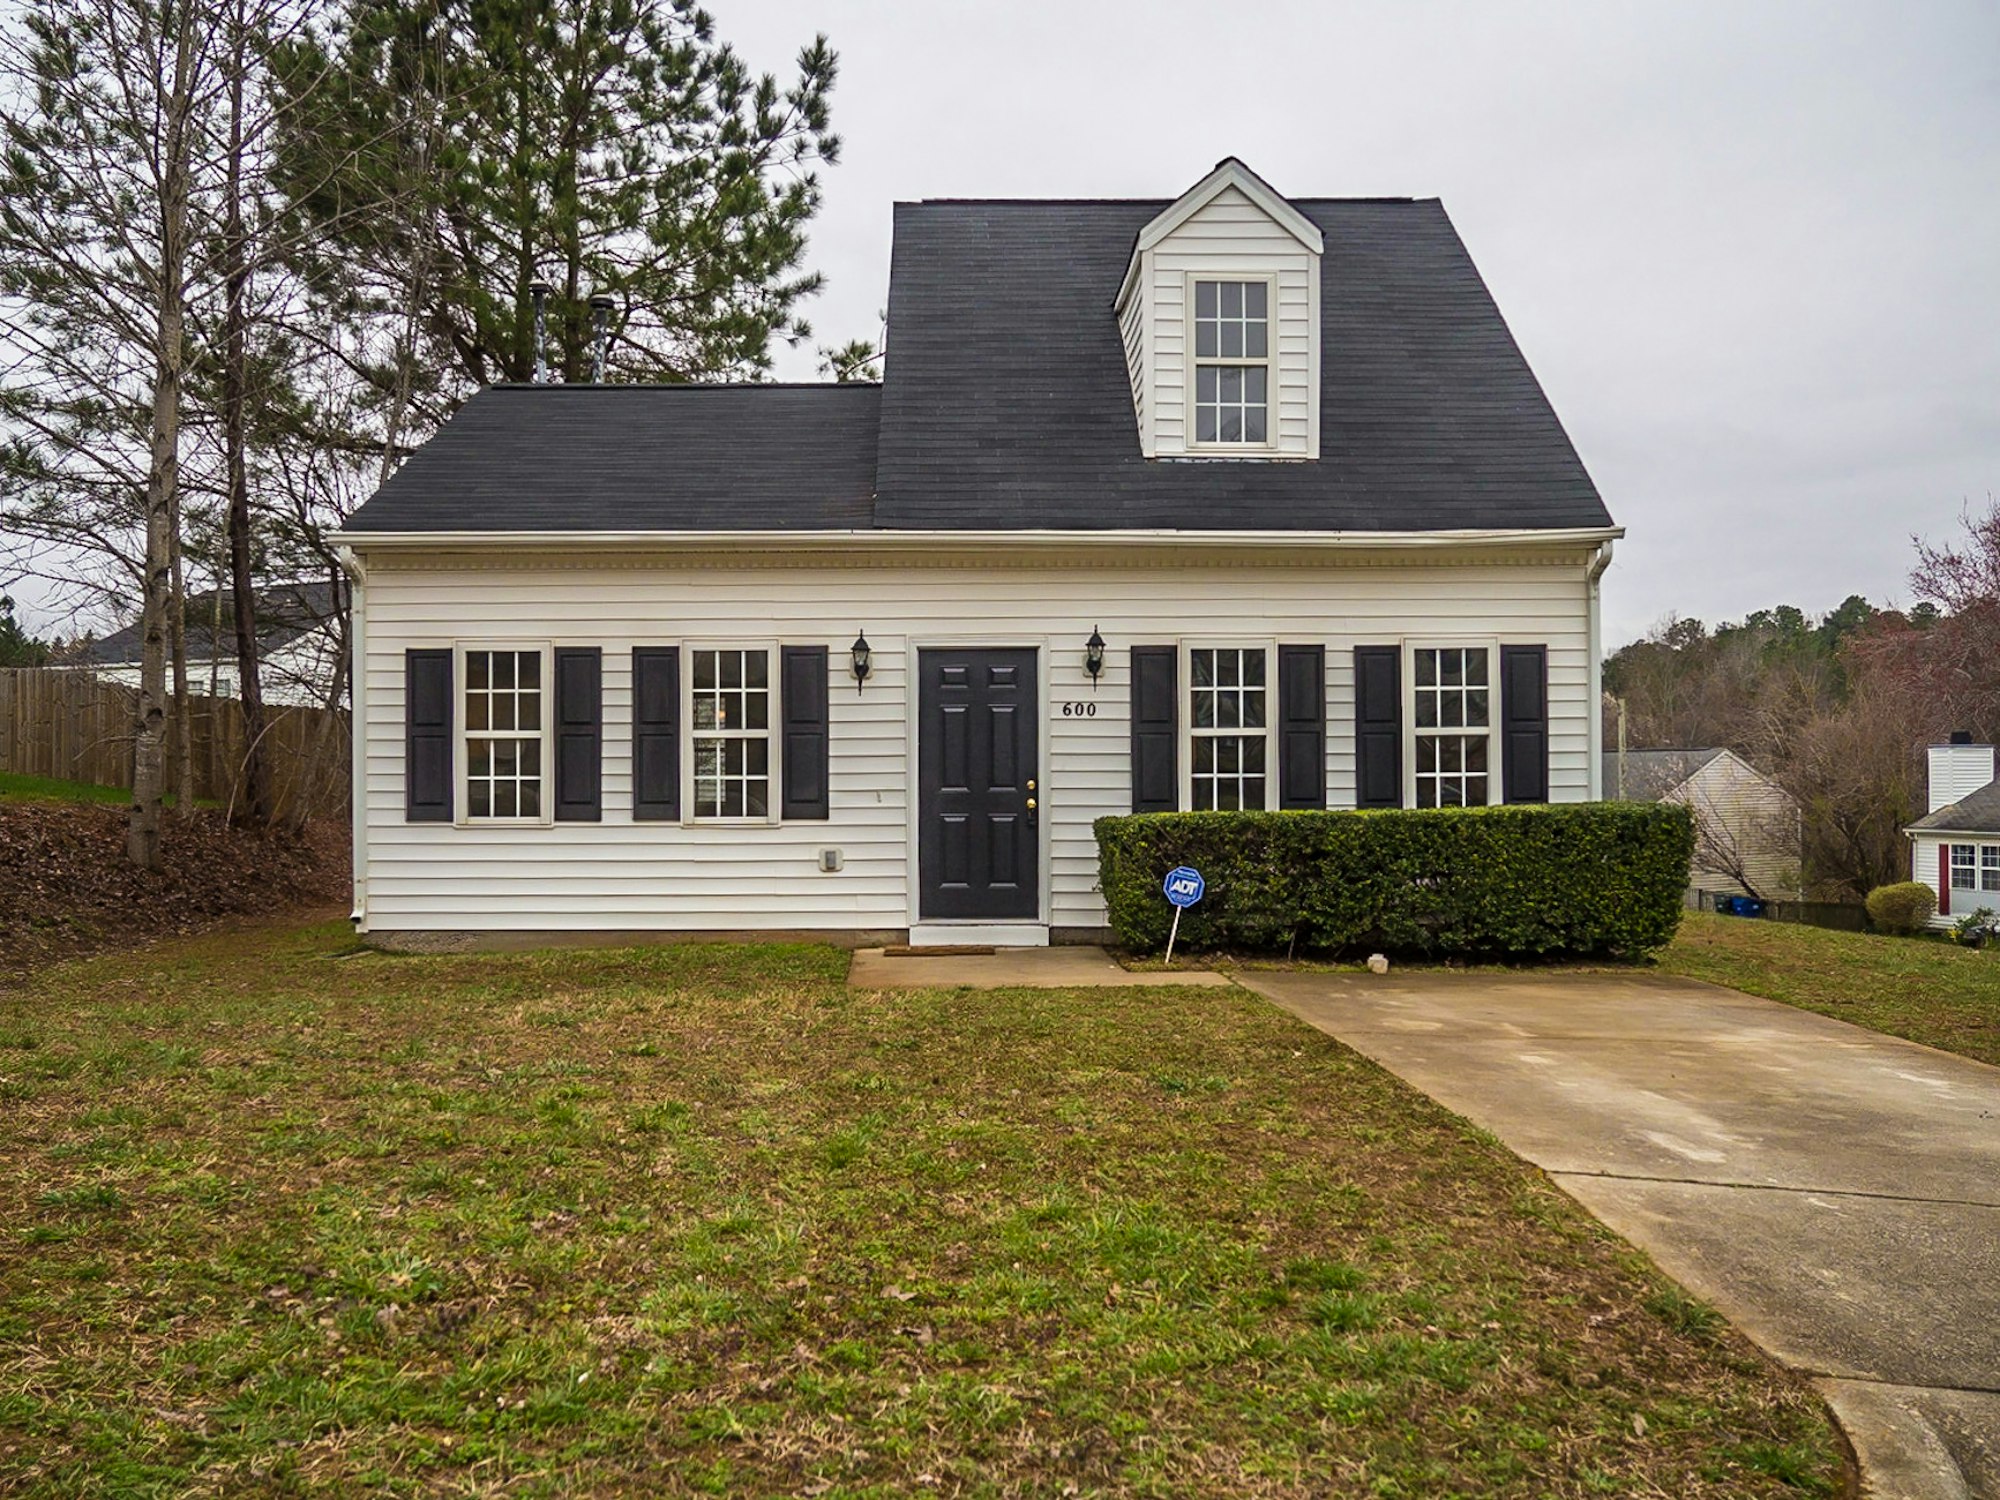 Photo 1 of 15 - 600 Parkander Ct, Raleigh, NC 27603